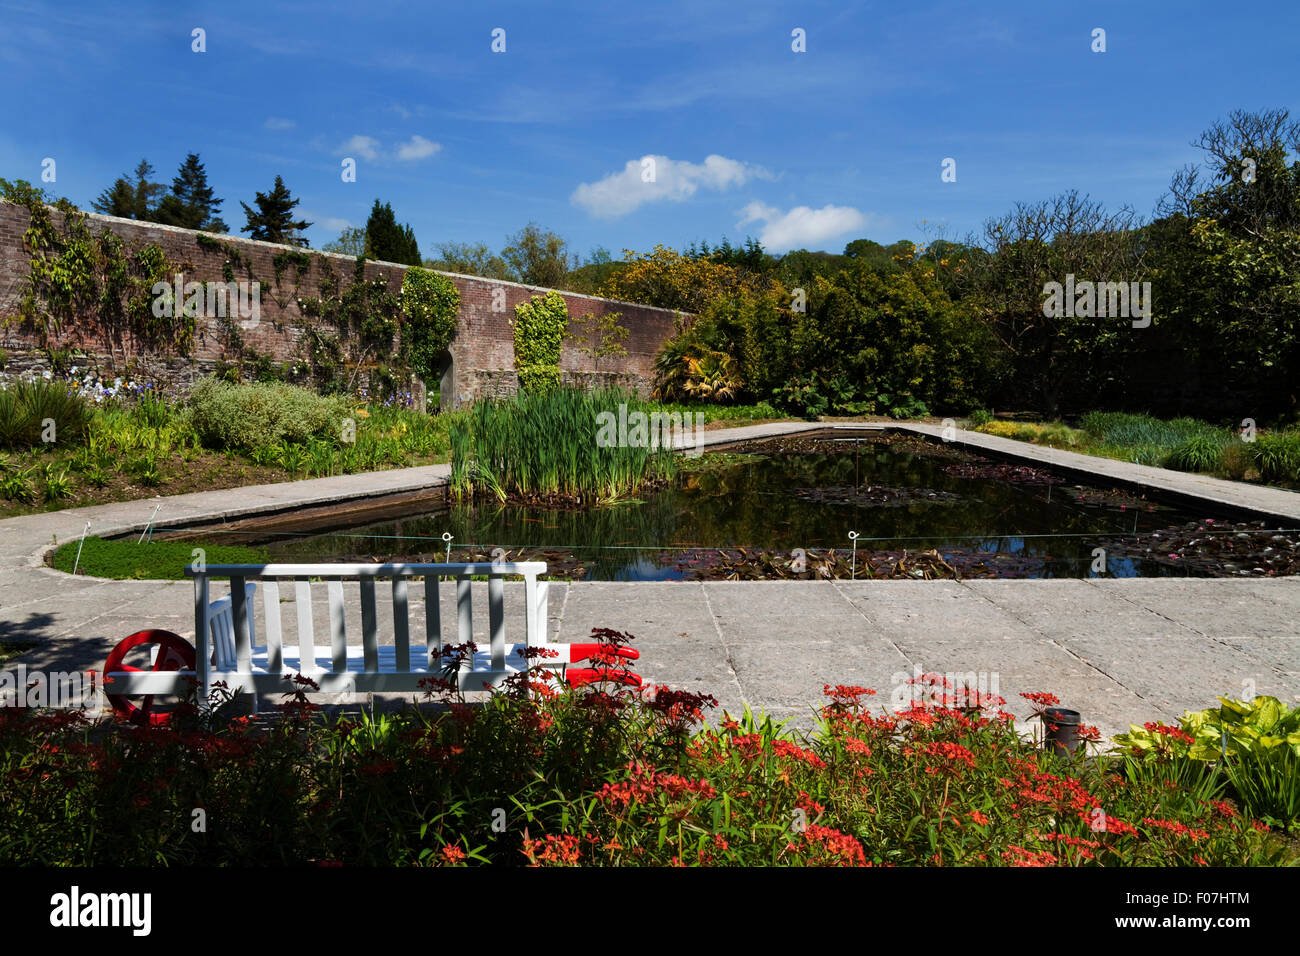 The Lily Pool in the Walled Garden, Mount Congreve Gardens, Near Kilmeaden, County Waterford, Ireland Stock Photo